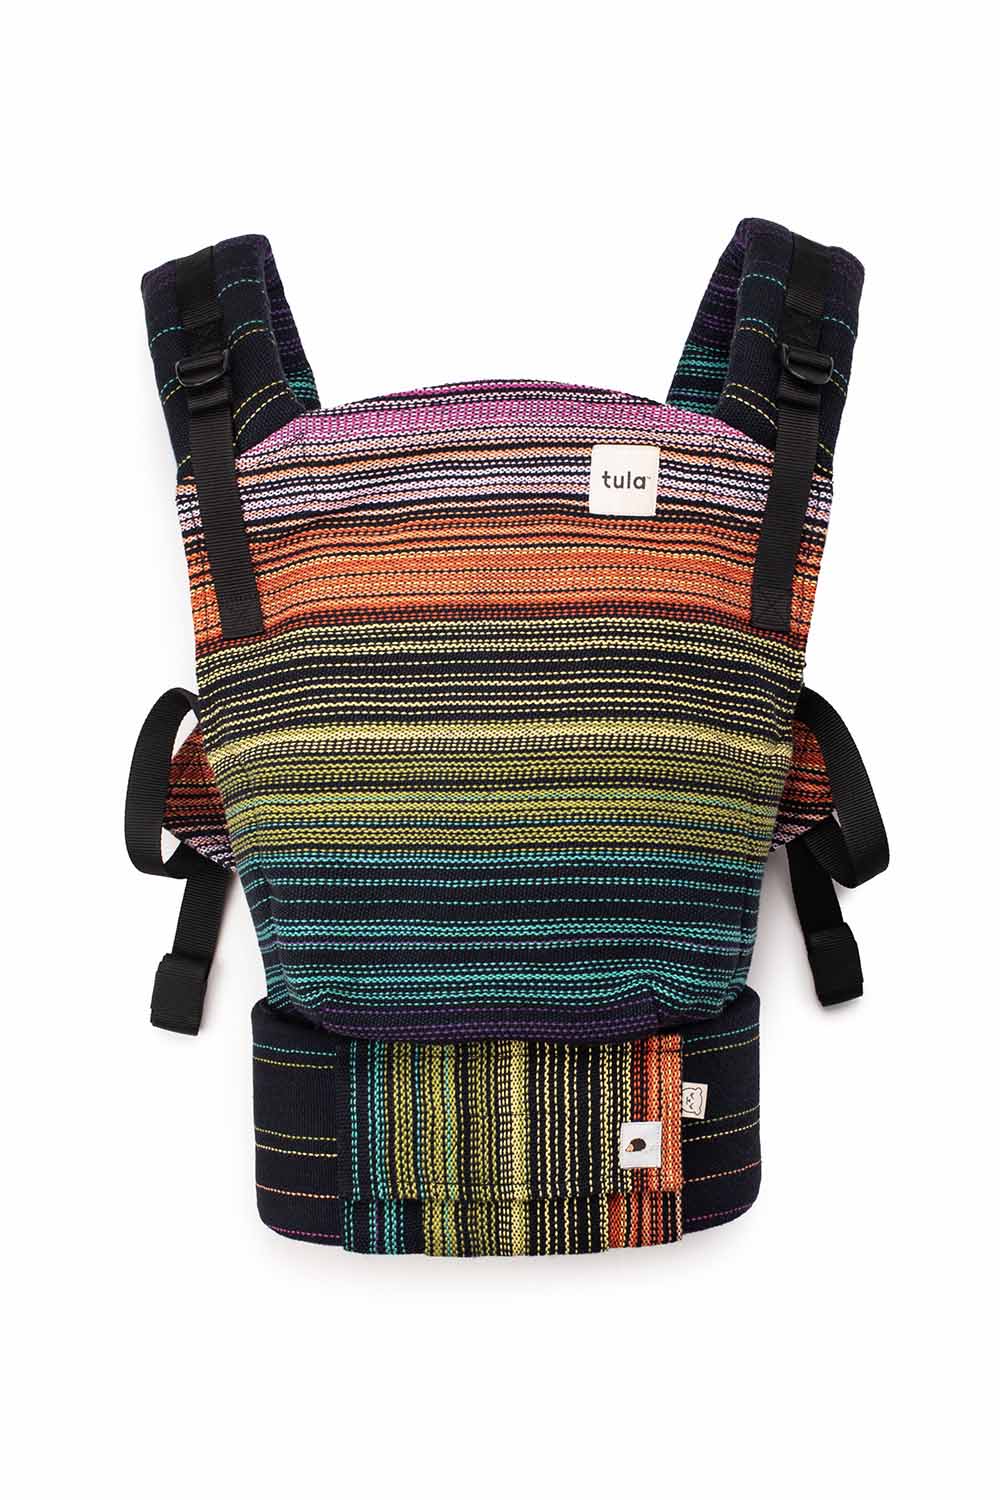 Prism - Signature Handwoven Free-to-Grow Baby Carrier